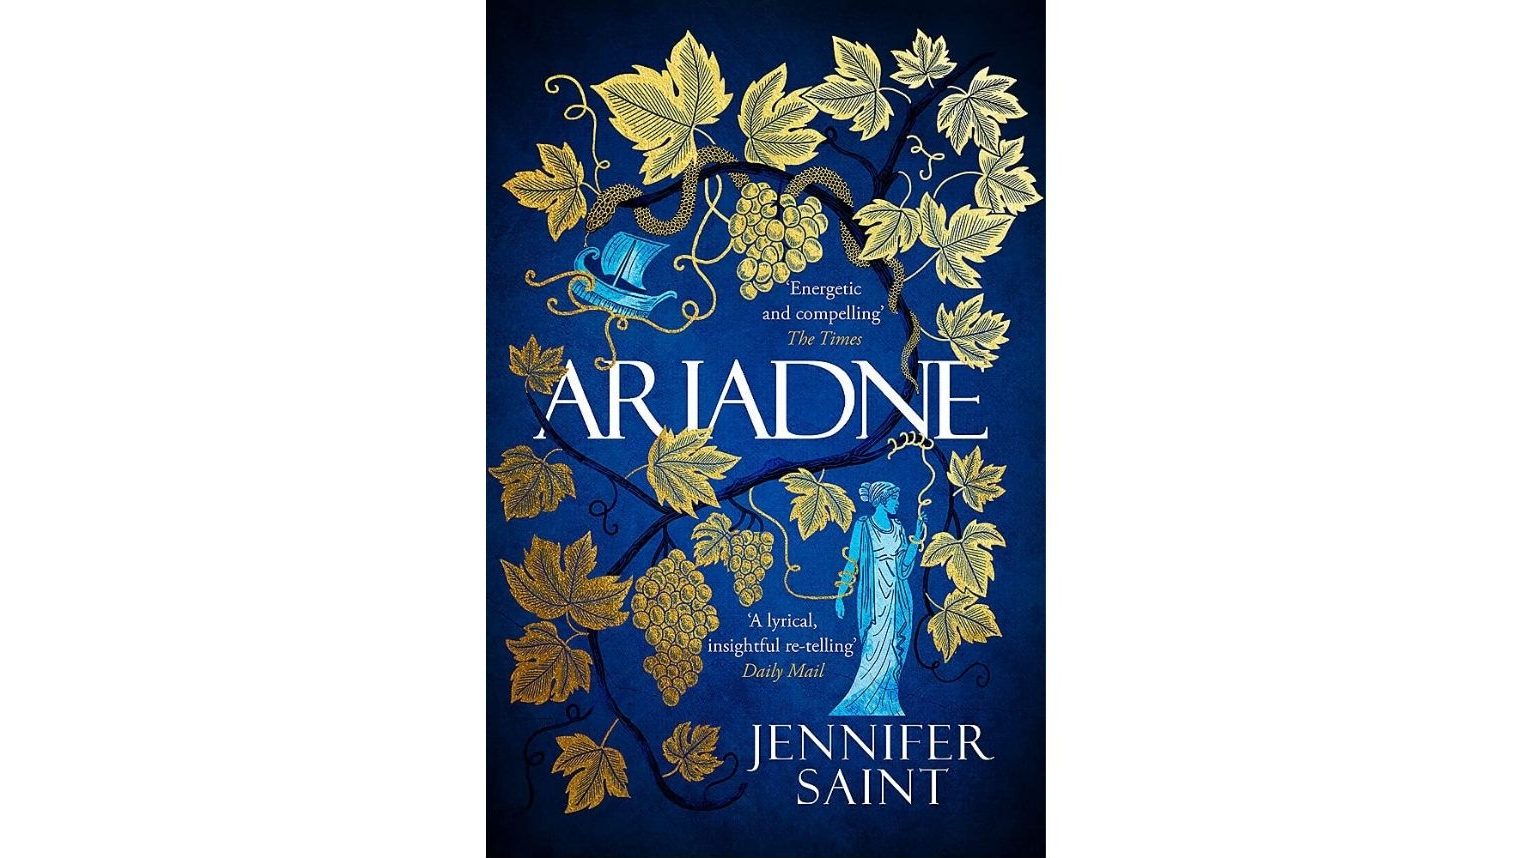 Ariadne by Jennifer Saint is a great choice for fans of Song of Achilles